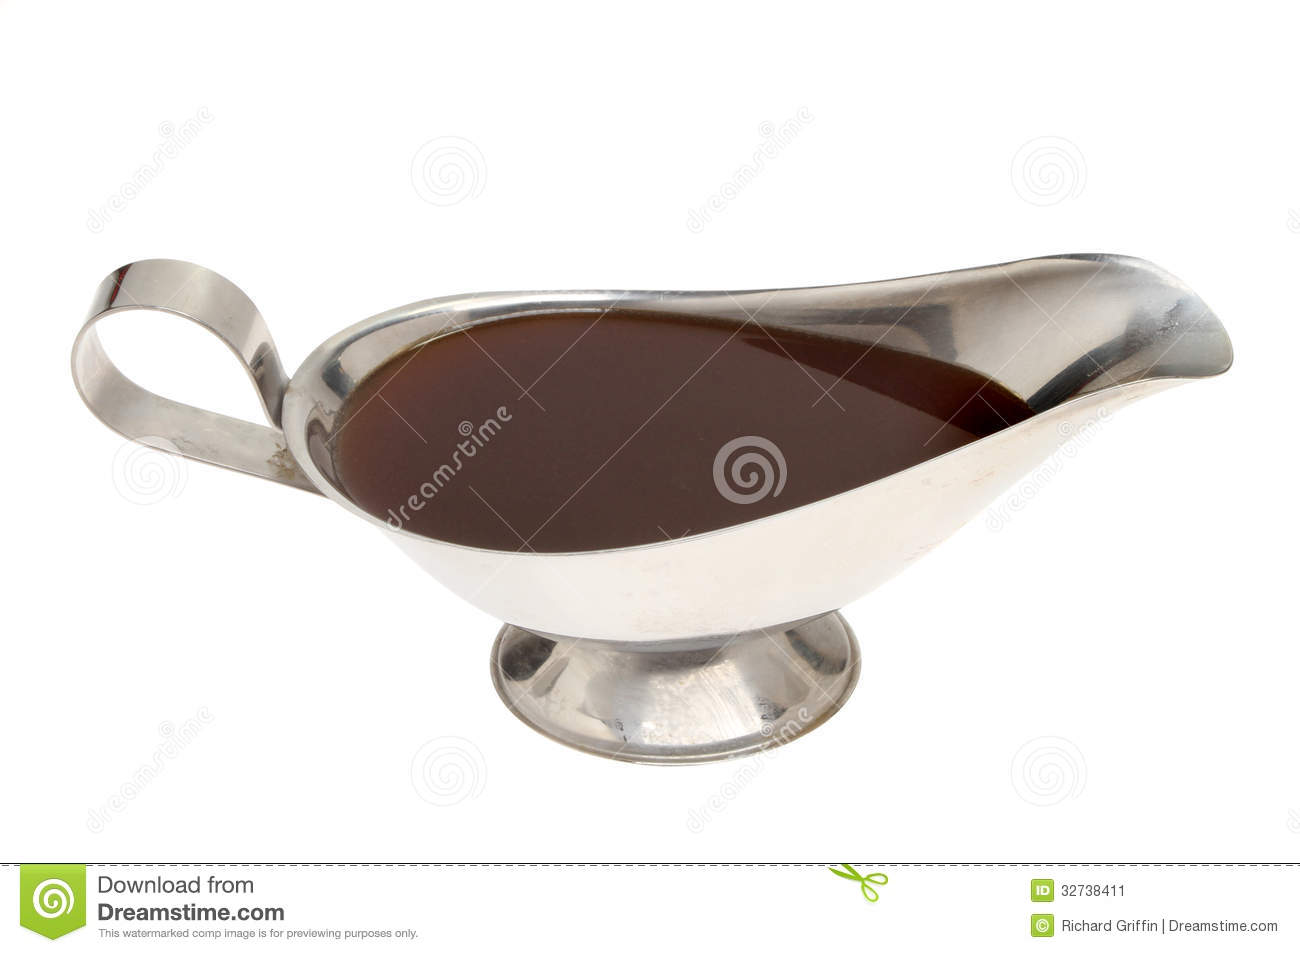 Meat Gravy In A Stainless Steel Gravy Boat Isolated Against White